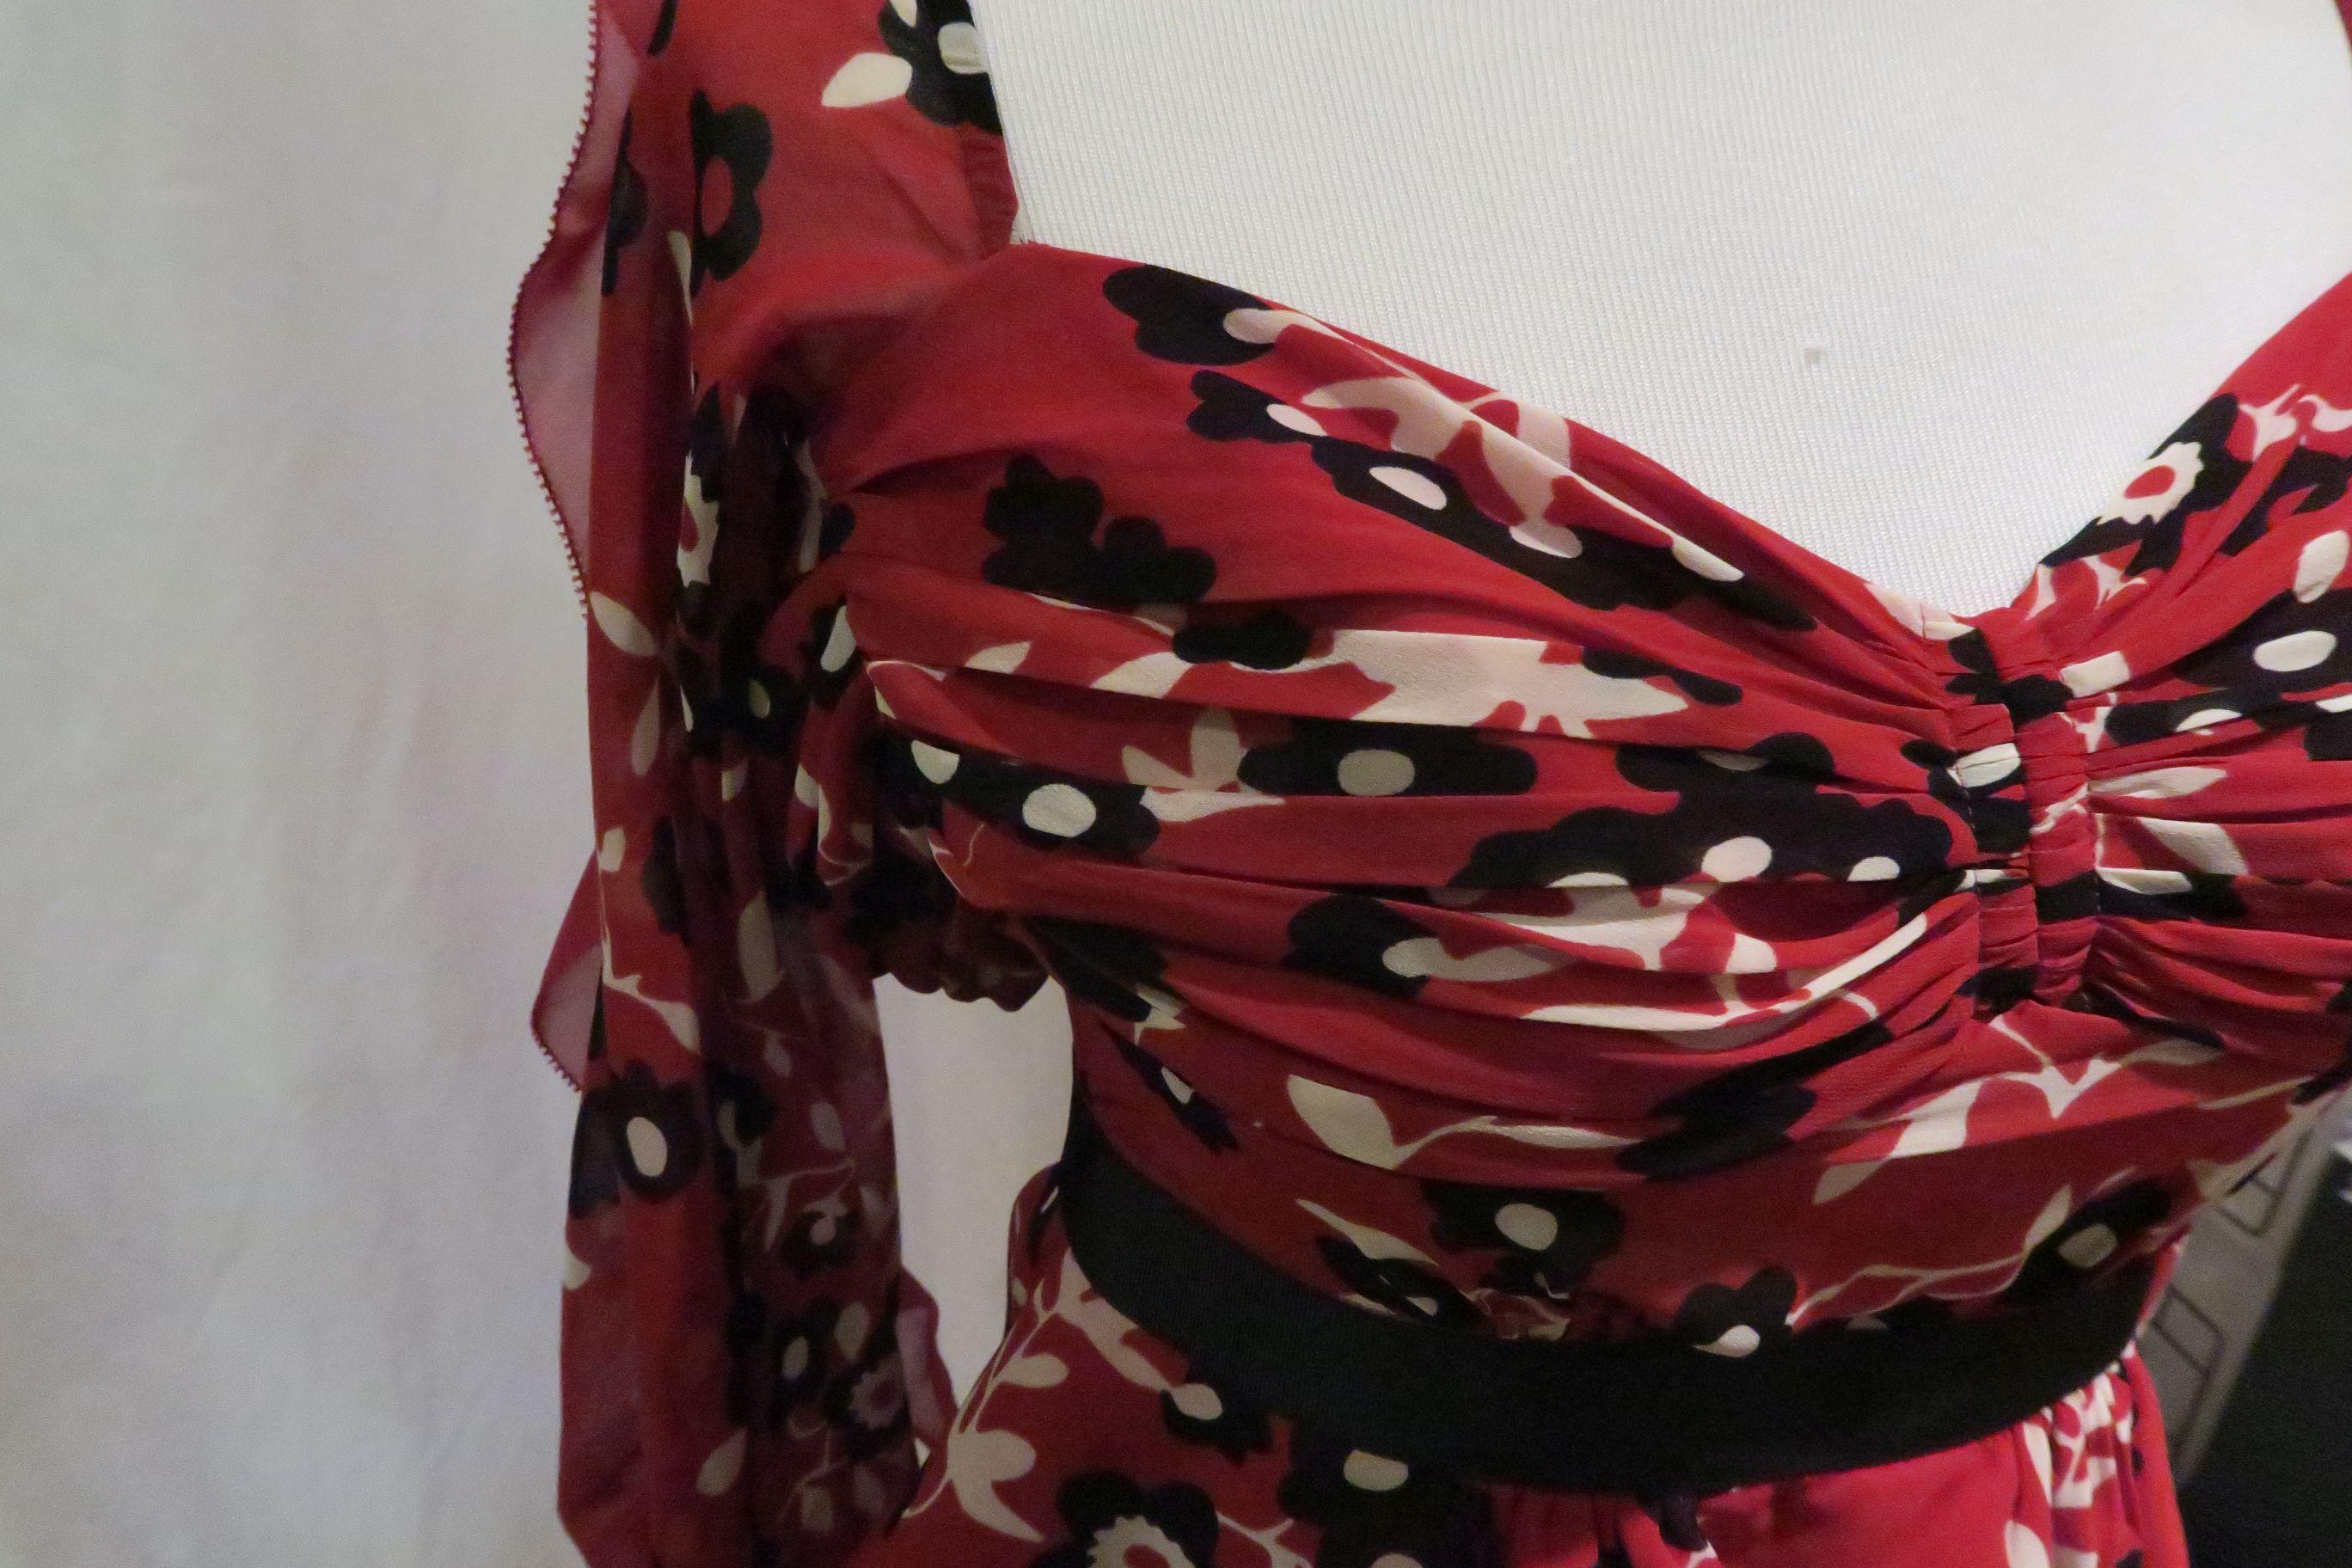 Self-Portrait Red w/Black/White Floral Print Peplum Top, size 0, new with tags